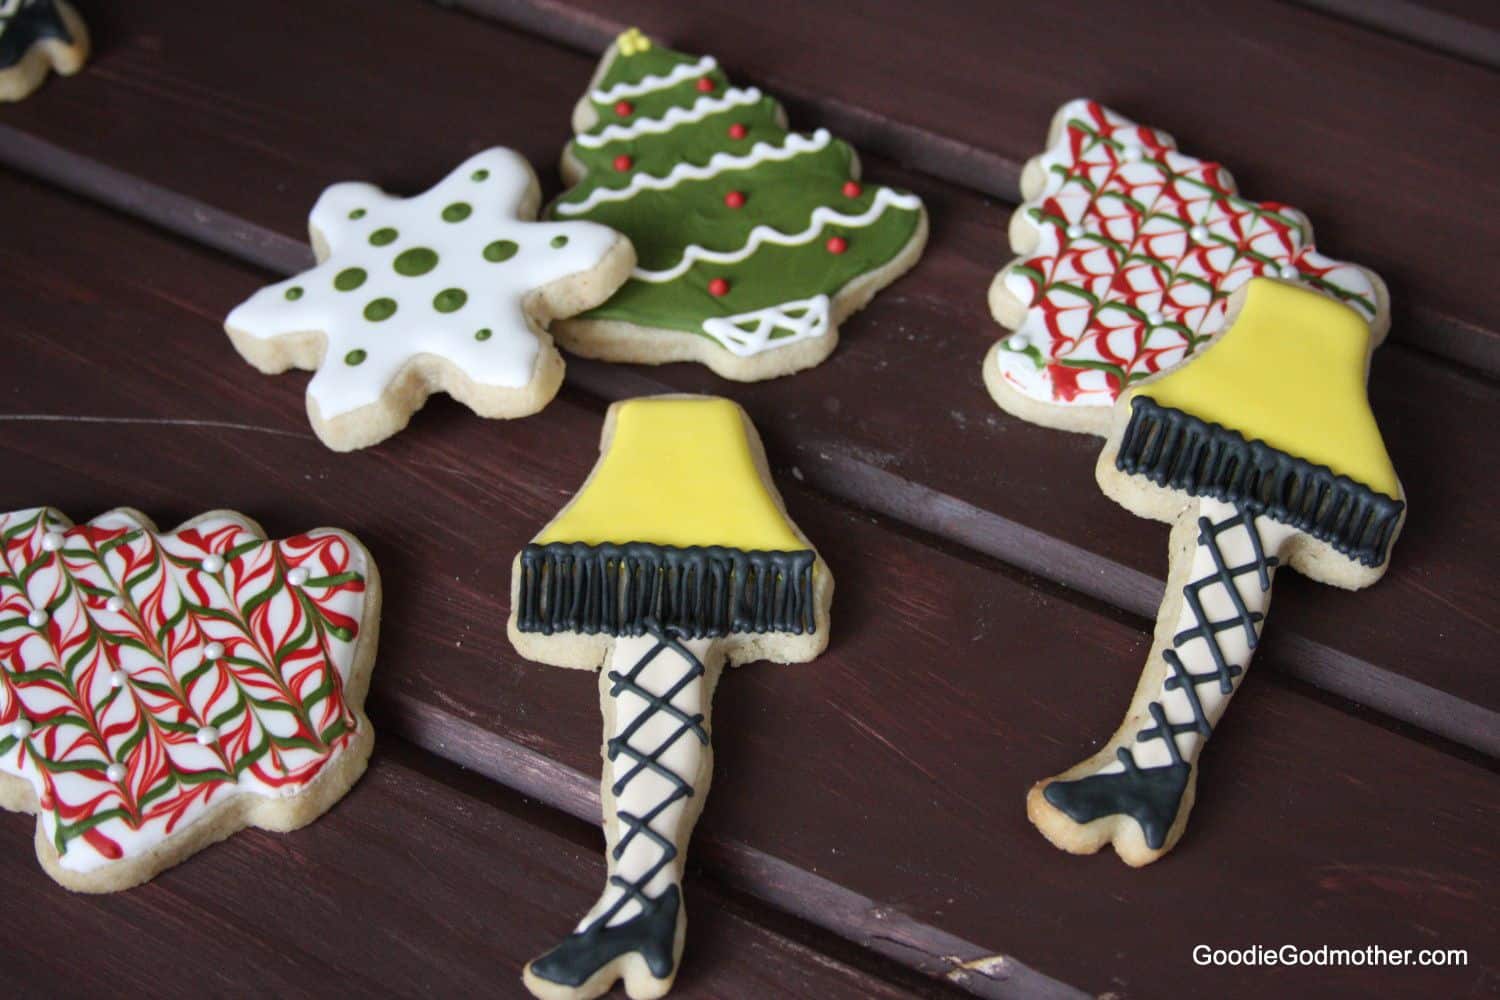 Elevate Your Cookie Decorating Game with the Kodak Luma 150